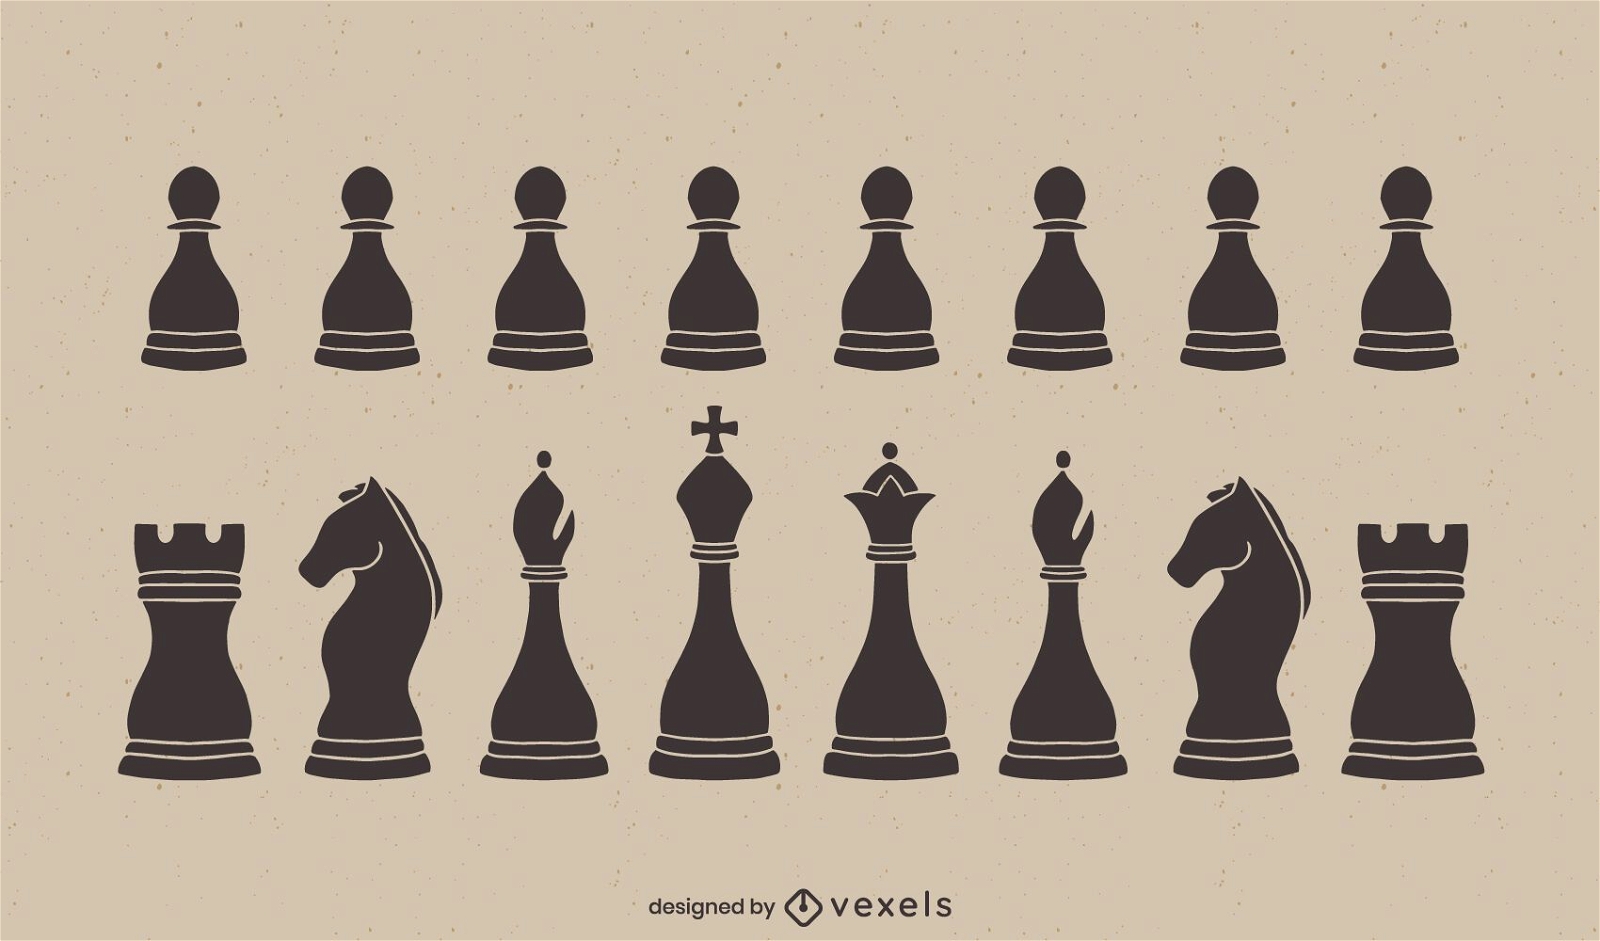 Classic Chess Pieces Cut Out Set Vector Download